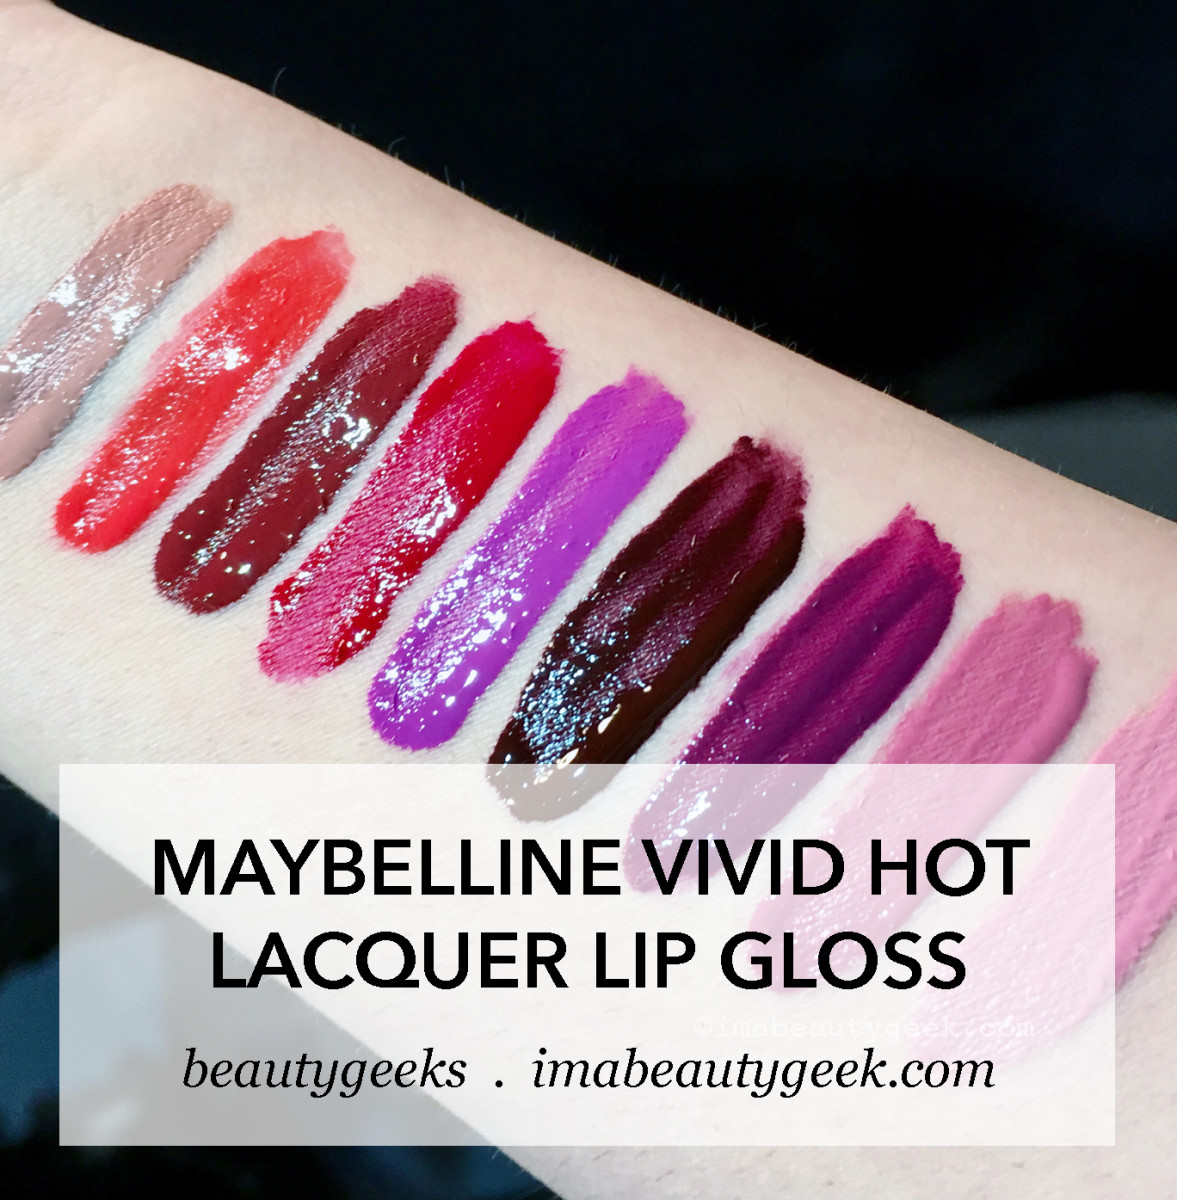 Maybelline Vivid Hot Lacquer Lip Gloss sneak-peek swatches!